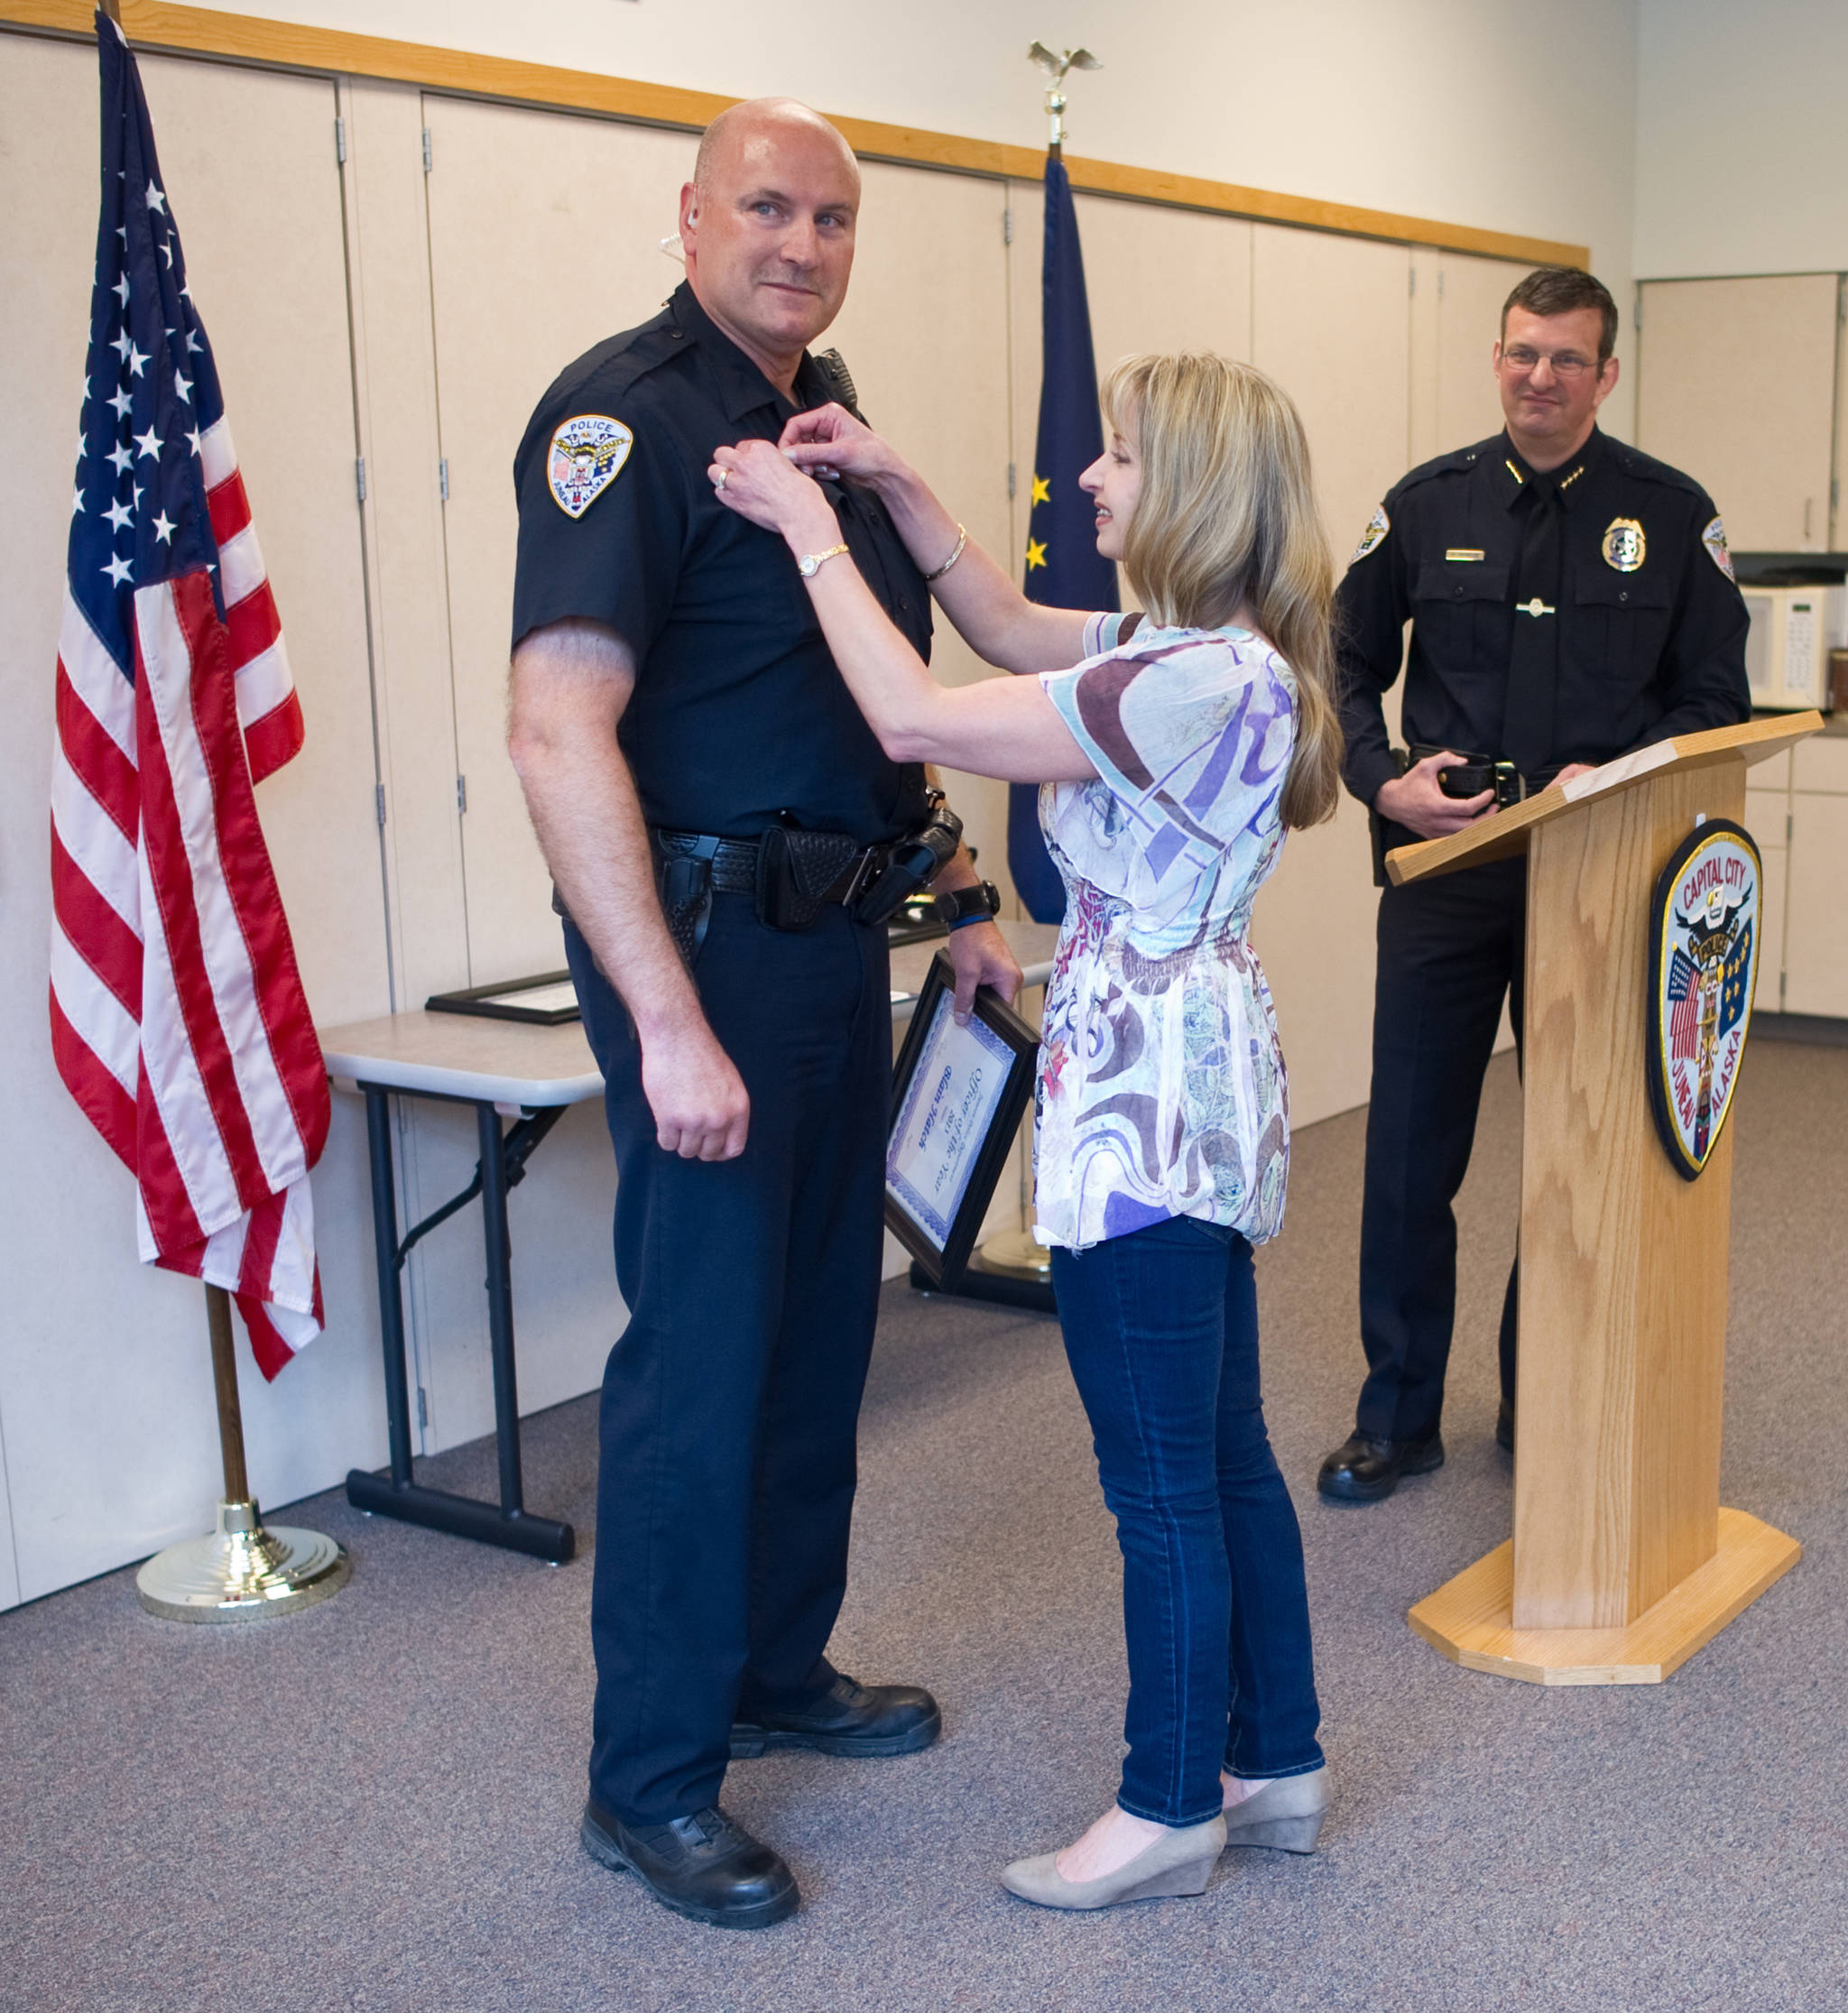 Juneau Police Department Sgt. Blain Hatch is pinned by his wife, Tiffany, after being named Officer of the Year for 2013 by the police chief, Bryce Johnson, during the Quarterly Award Ceremony in May 2014. (Michael Penn | Juneau Empire)